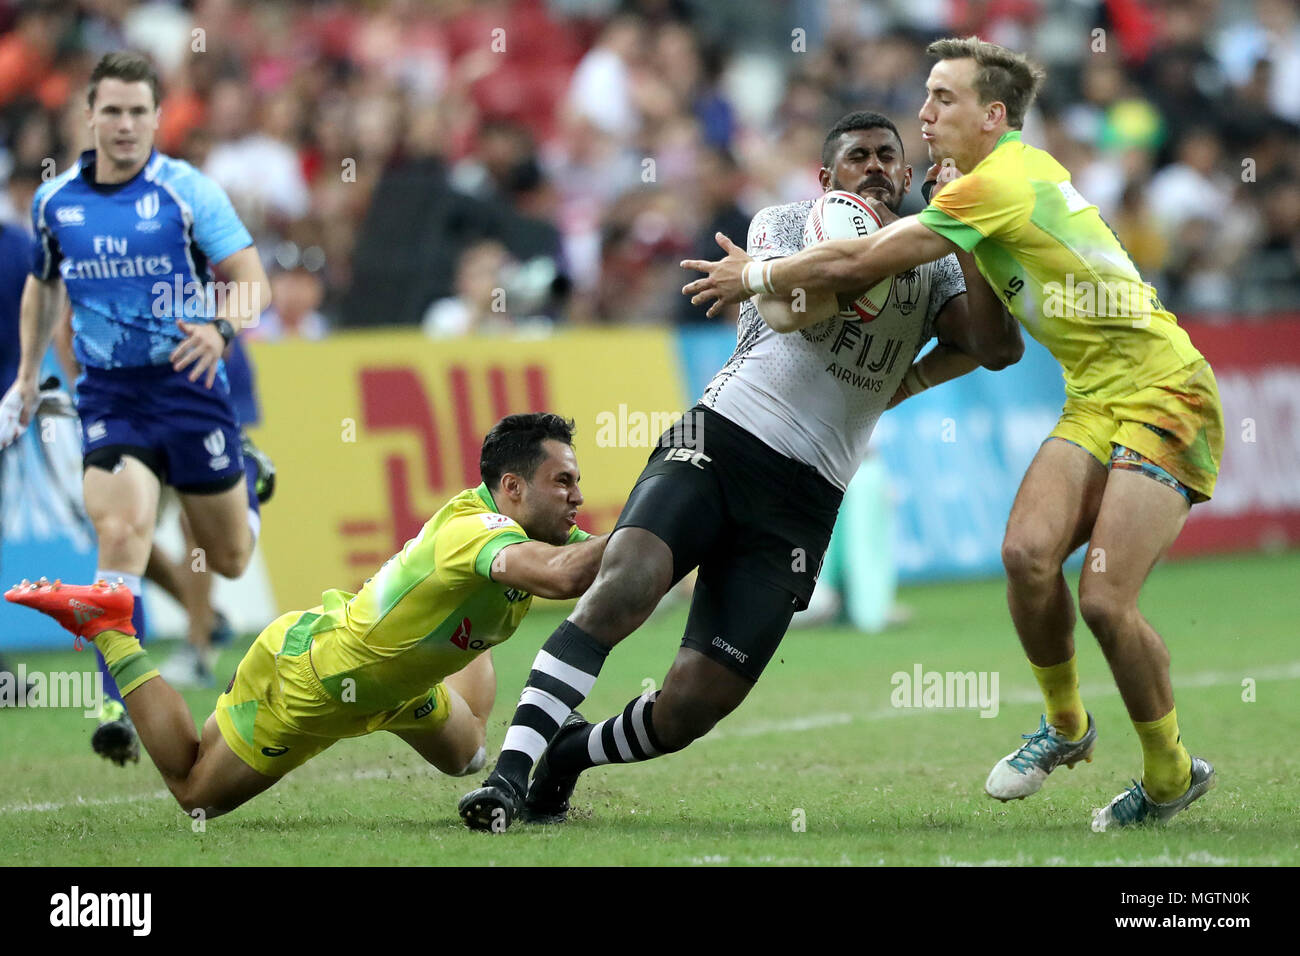 Singapore. 29th Apr, 2018. Kalione Nasoko (centre) of Fiji is tackled by Bradon Quinn (left) and John Porch of Australia during the Cup Final match between Fiji and Australia at the Rugby Sevens tournament at the National Stadium. Singapore. Credit: Paul Miller/ZUMA Wire/Alamy Live News Stock Photo